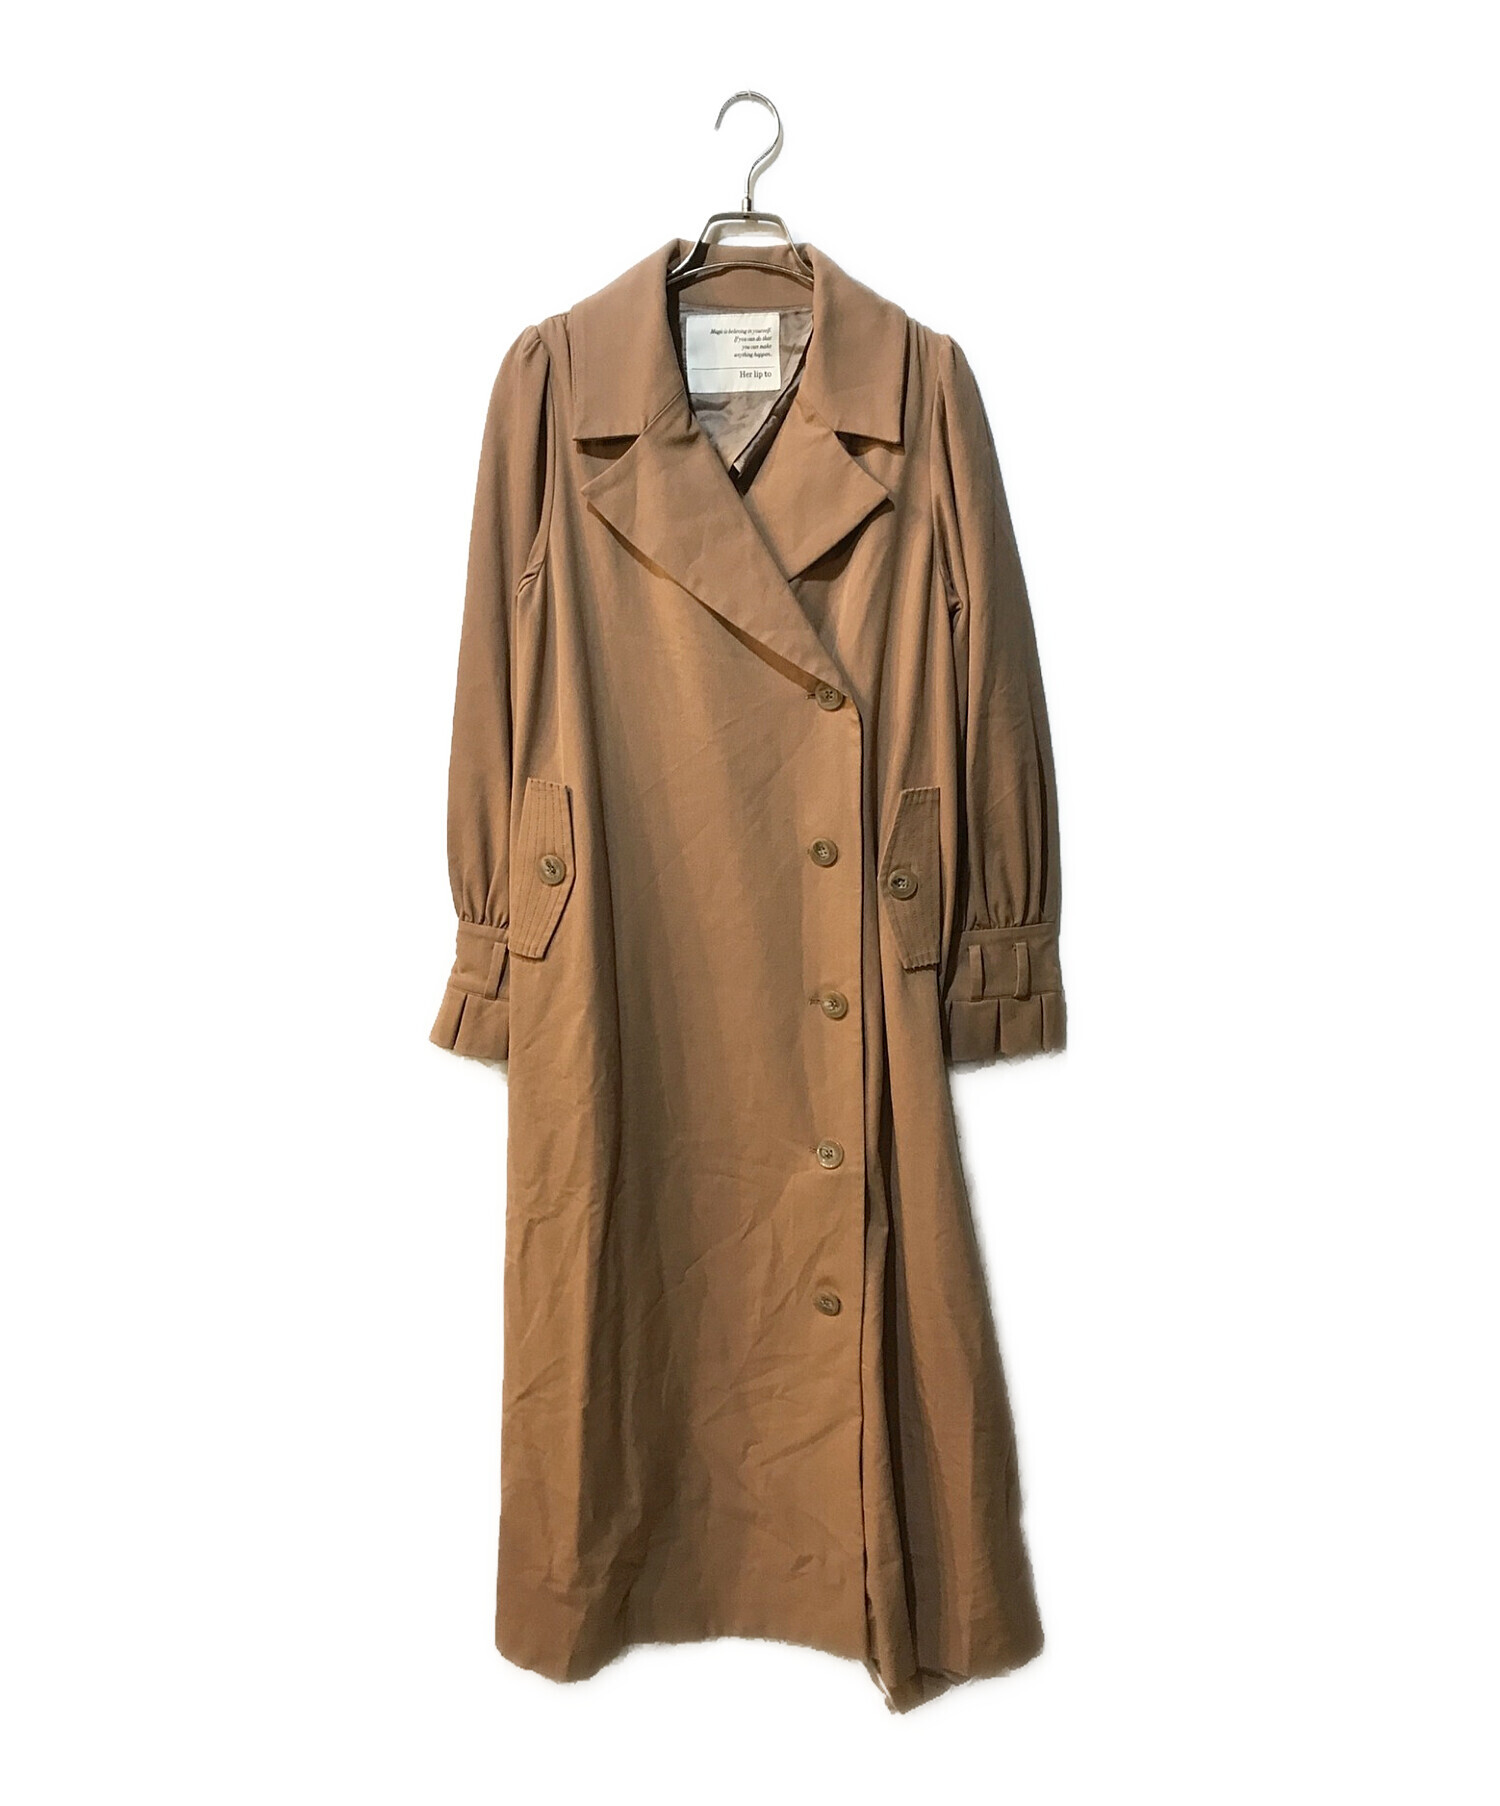 Her lip to☆Belted Dress Trench Coat - lapbm.org